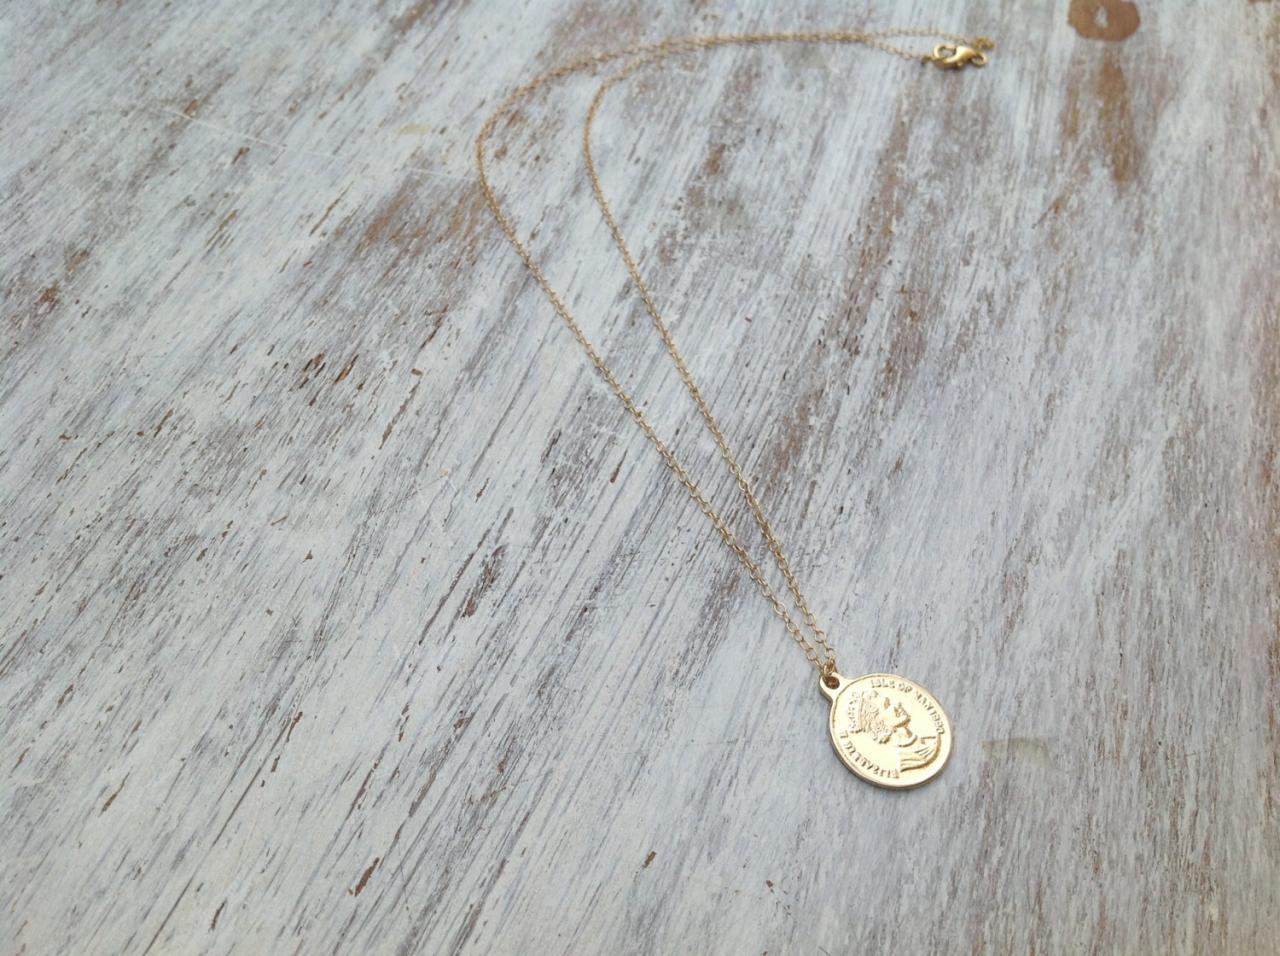 Gold Necklace, Gold Coin Necklace, Coin Jewelry, Delicate Necklace, Dainty Necklace, Gold Disc, Sideway Coin, Gold Filled - 519